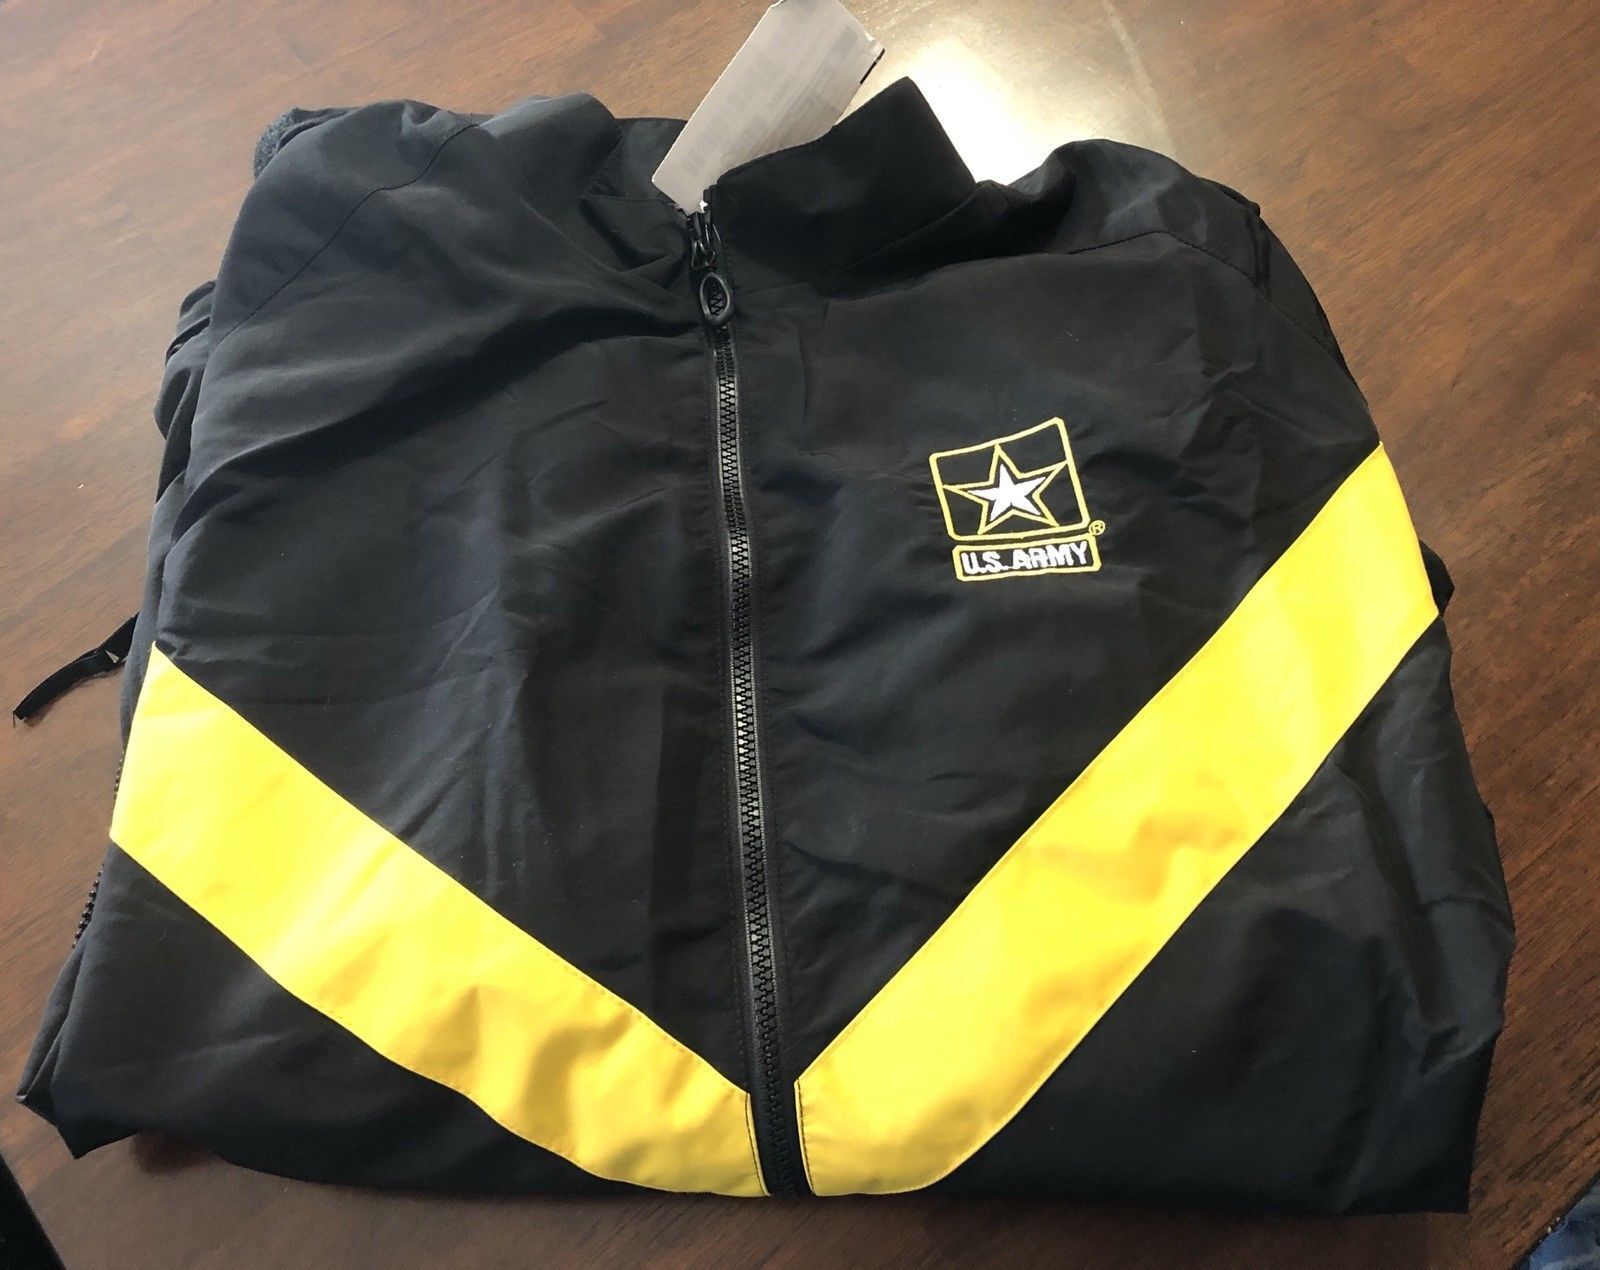 New US Army APFU (Army Physical Fitness Uniform) Jacket Black & Gold - Med - Reg